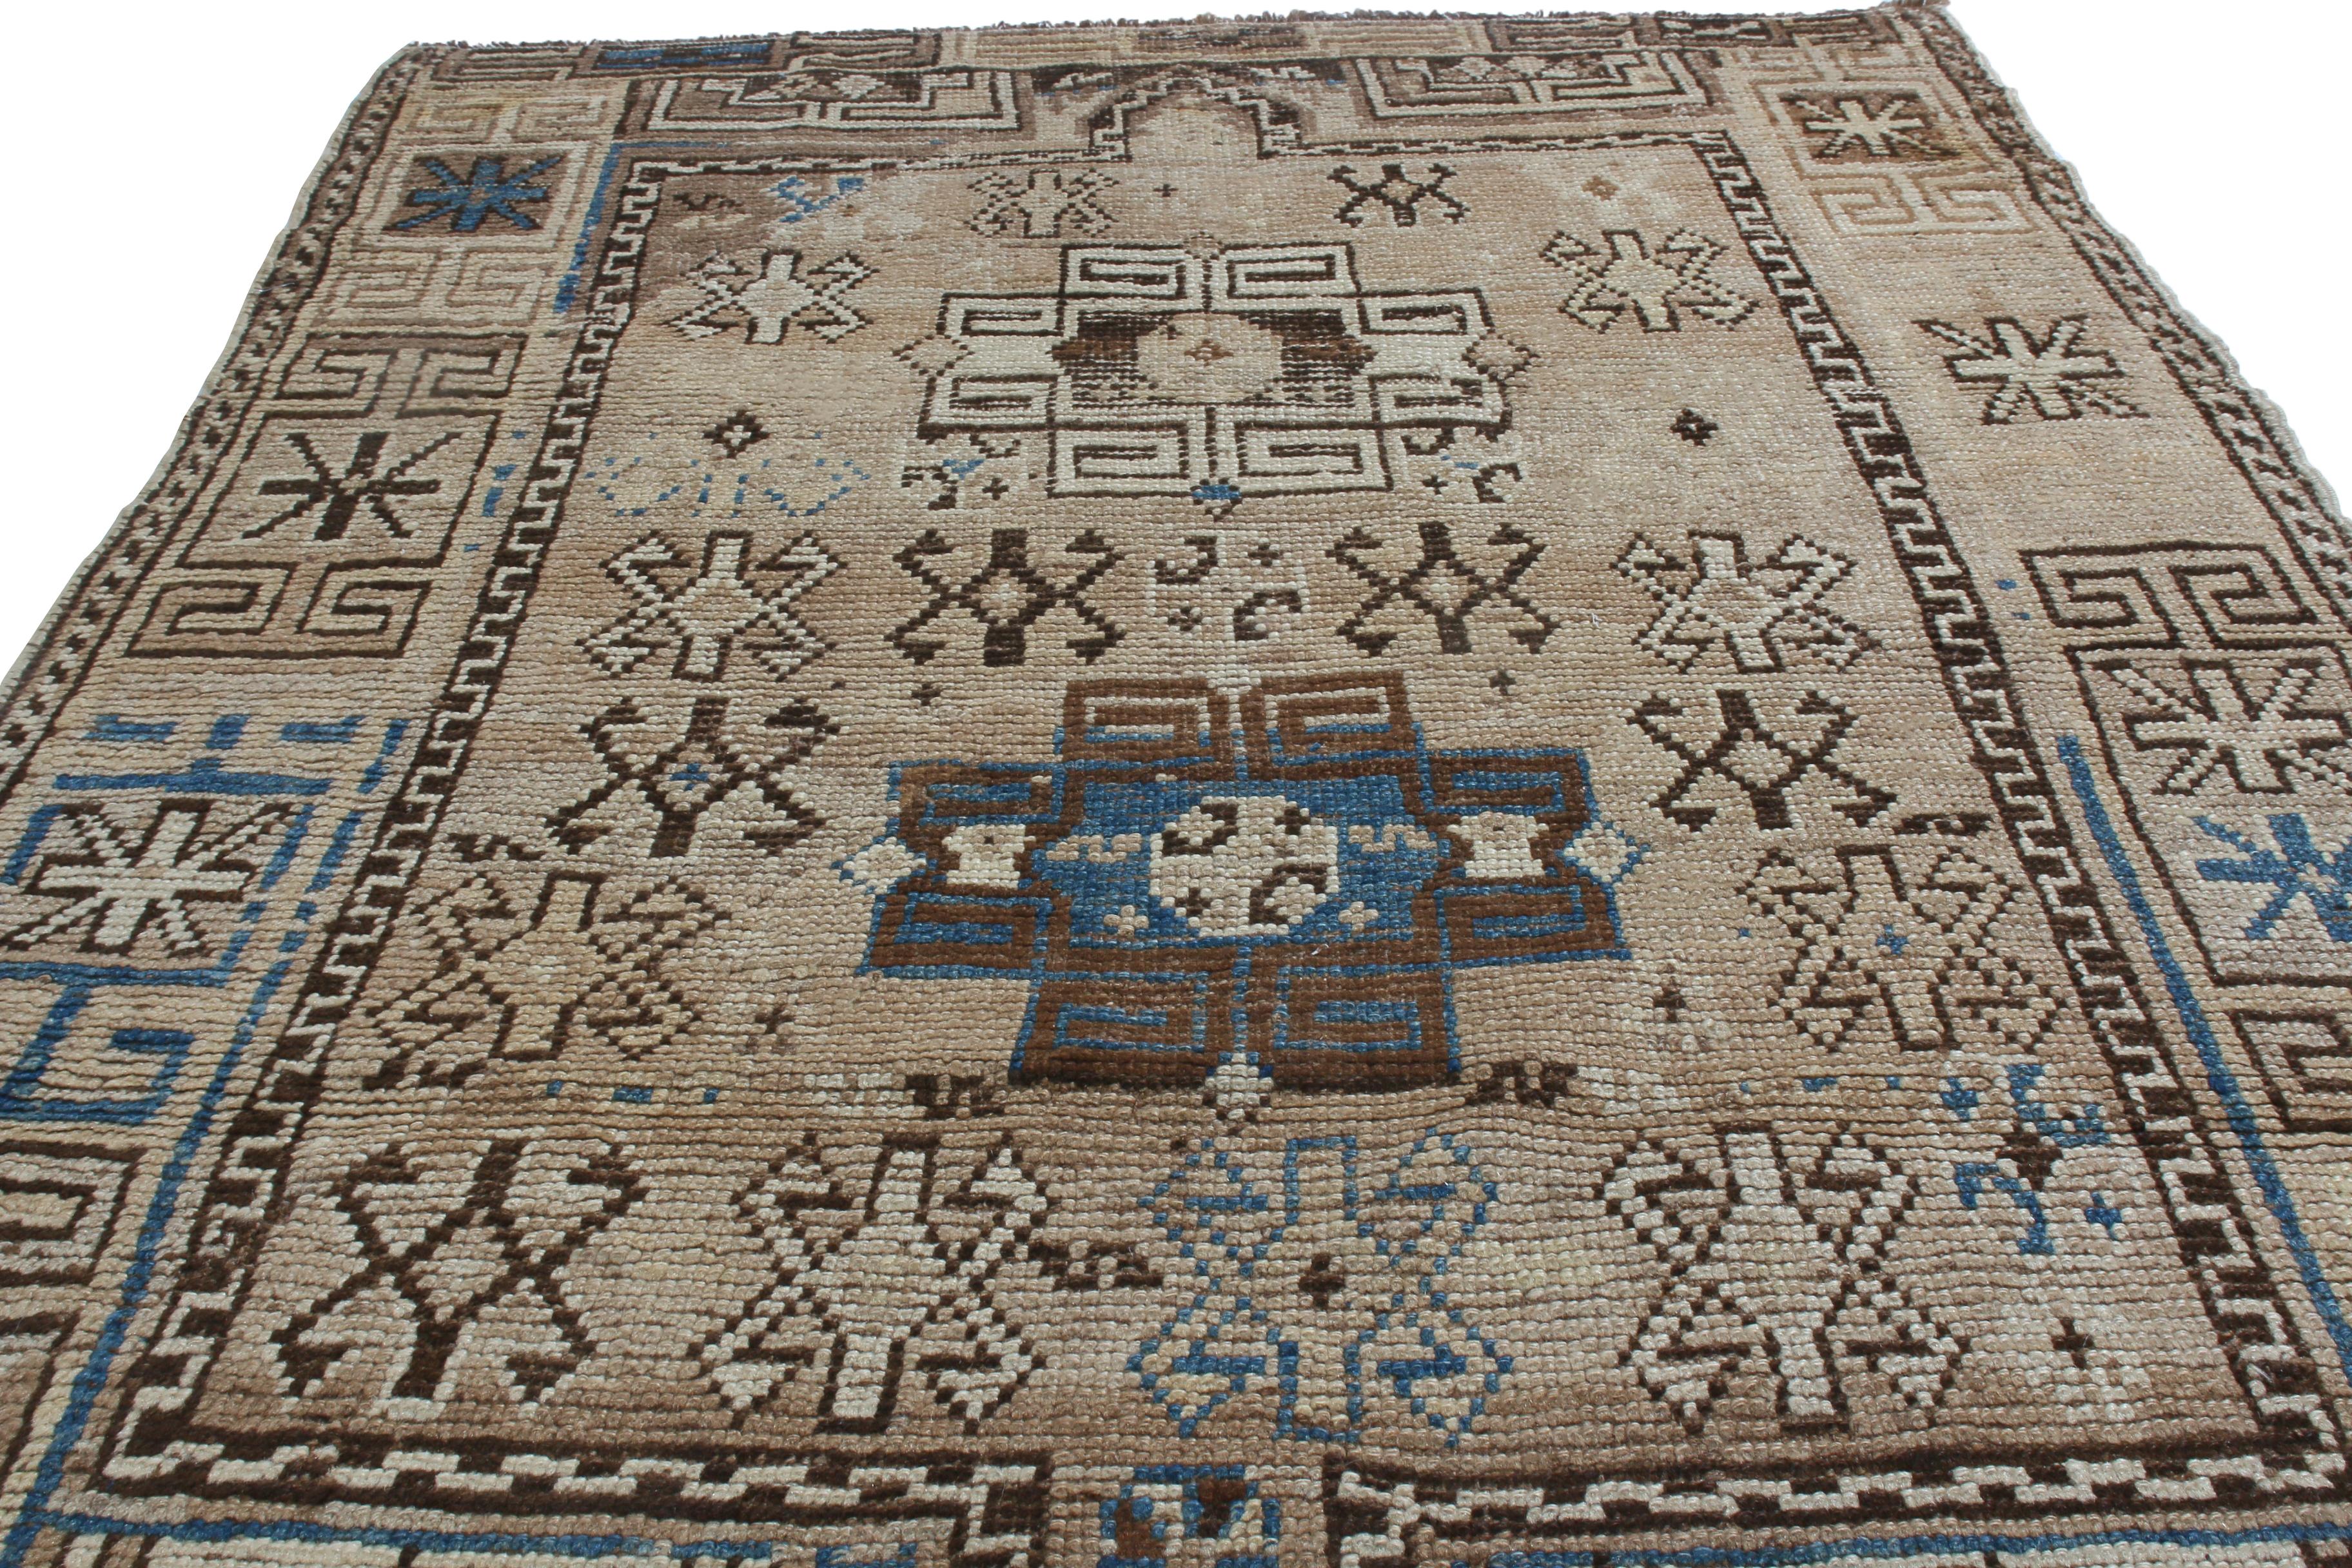 Originating from Russia in 1920, this antique traditional Kazak wool rug enjoys an uncommon colorway pagination to its Dual medallion-style field design. Hand knotted in high quality wool with rustic beige, luminous blue, and rich brown colorways, a